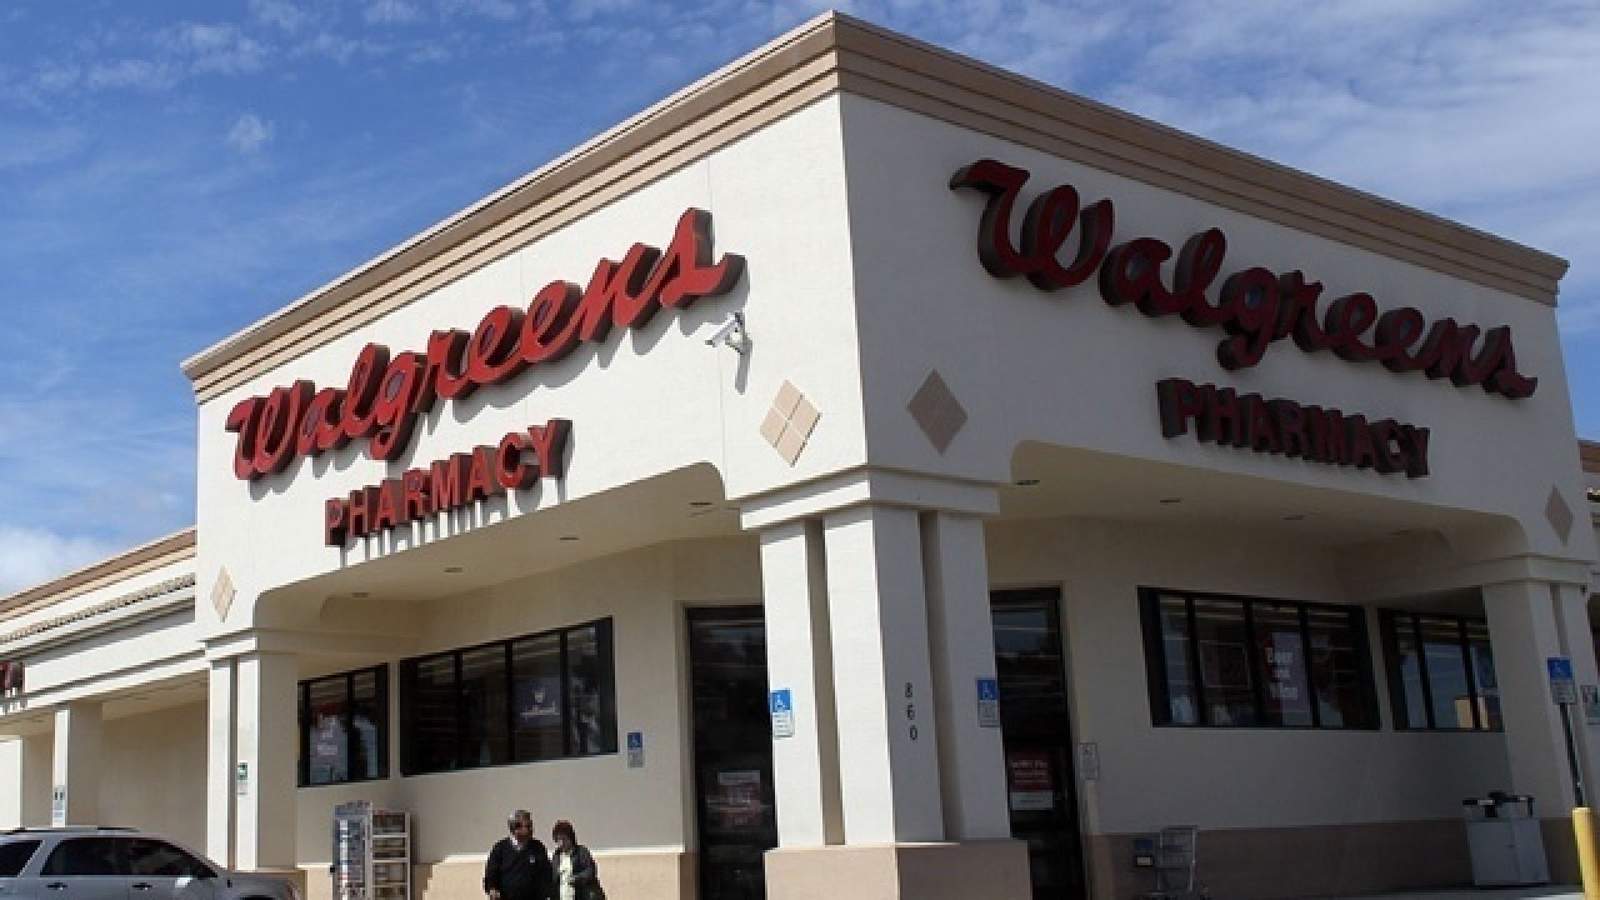 Walgreens in Marion County offering vaccinations, first in Central Florida